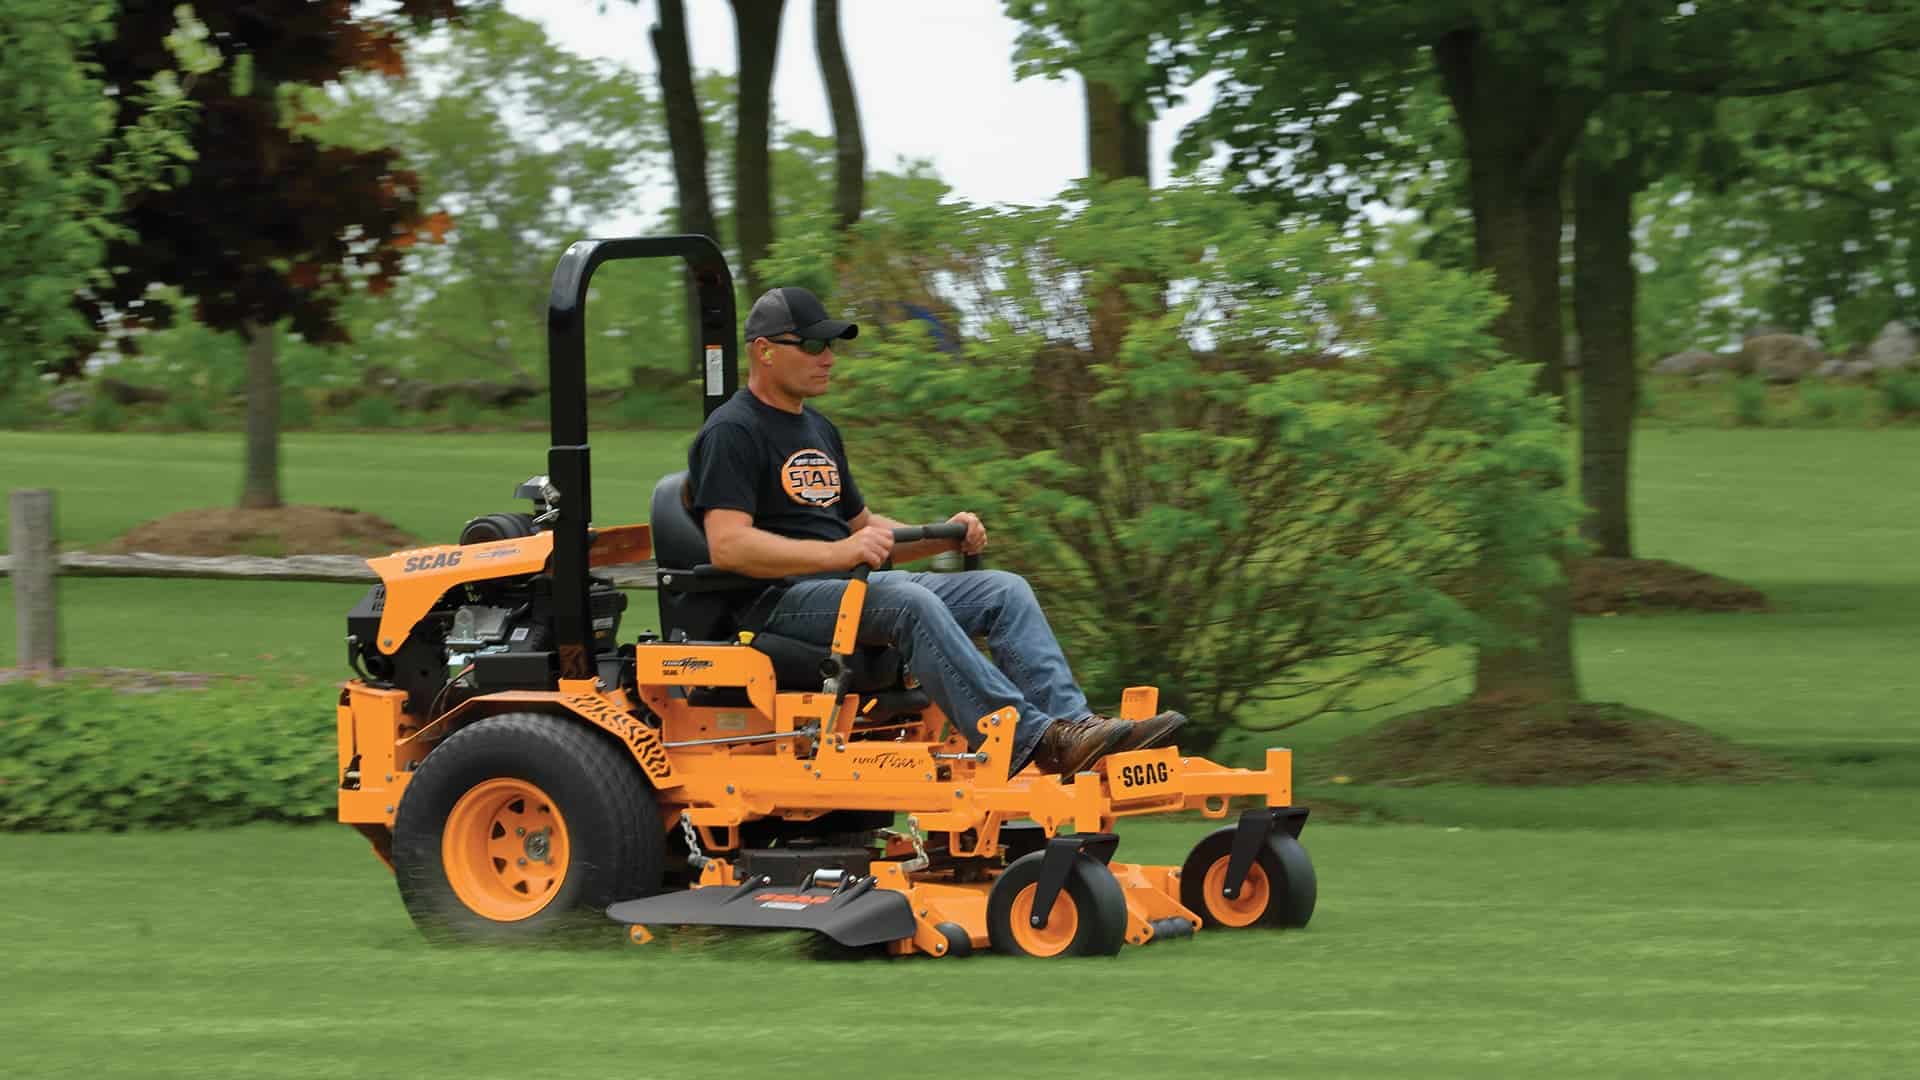 Pros and Cons of a Zero-turn Mower